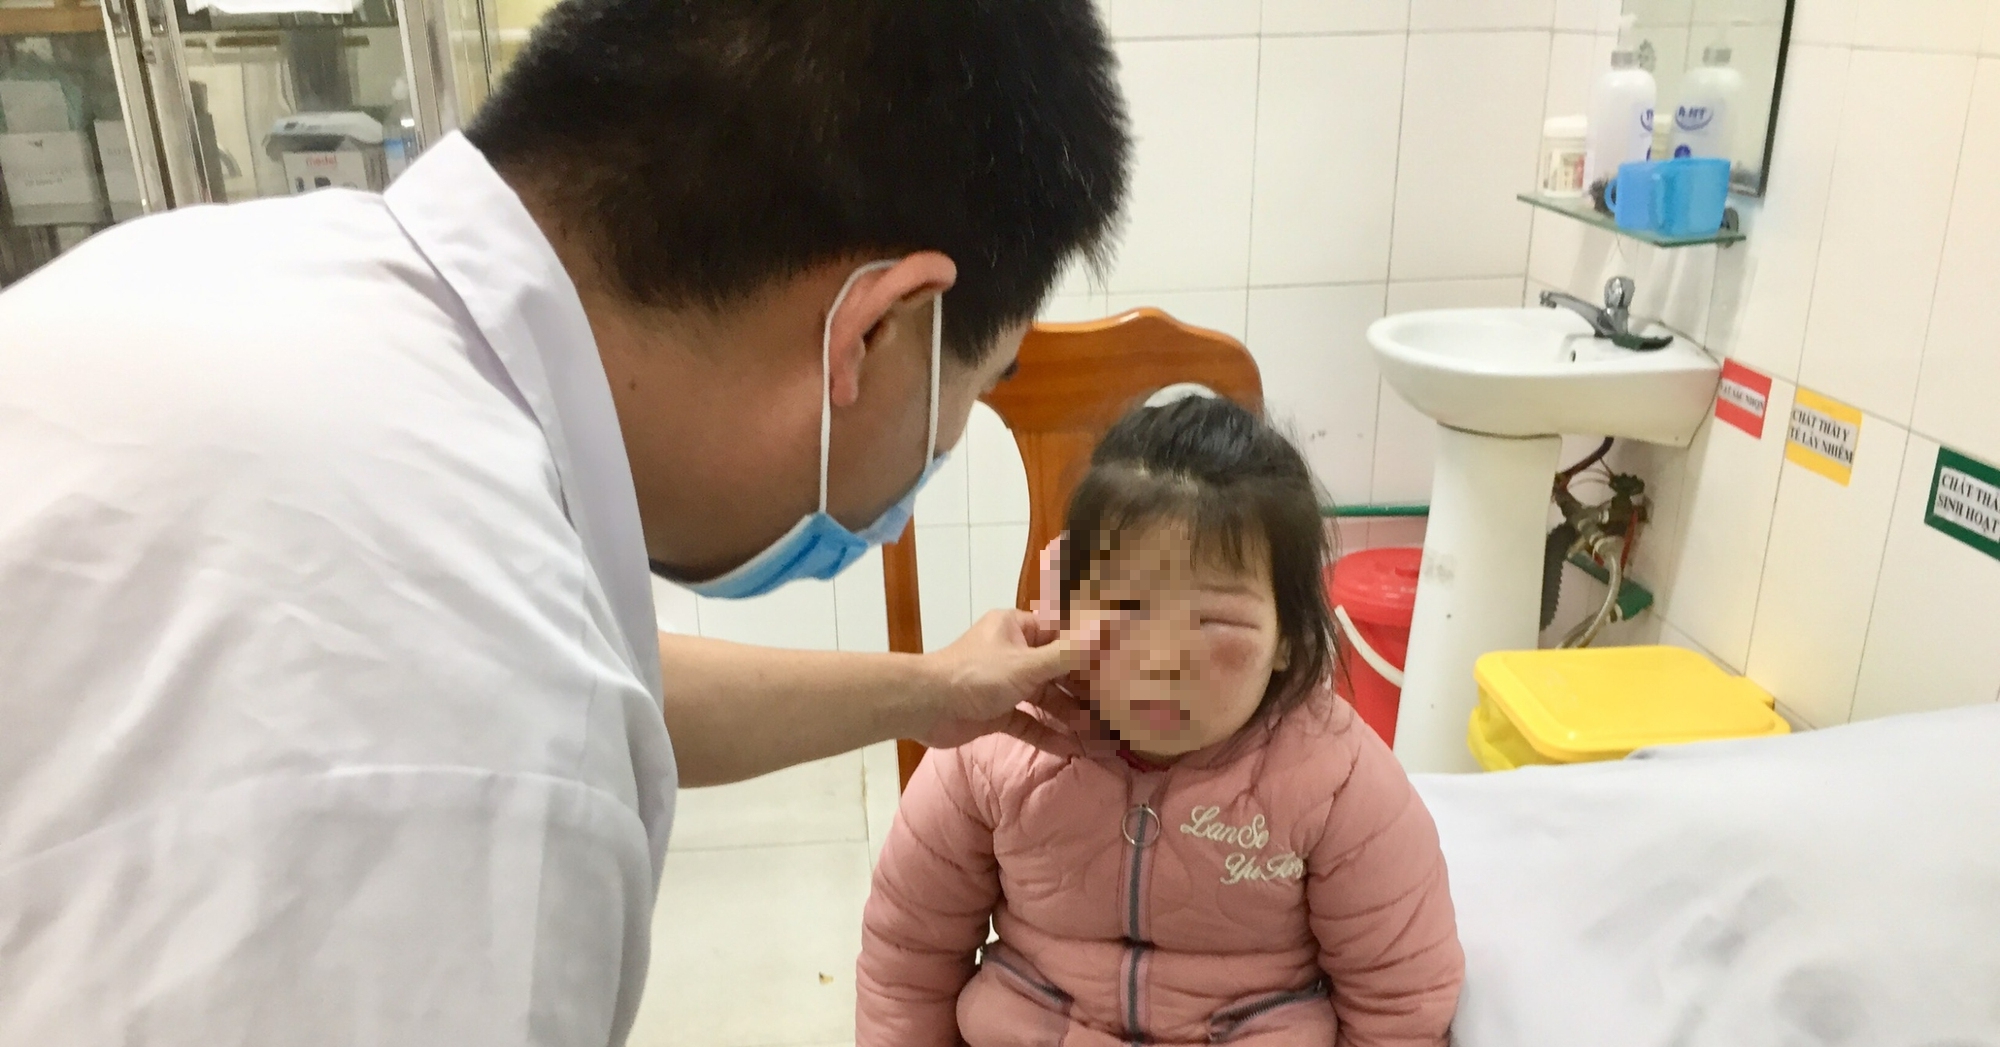 Washing her eyes with betel leaves, a 6-year-old girl almost went blind